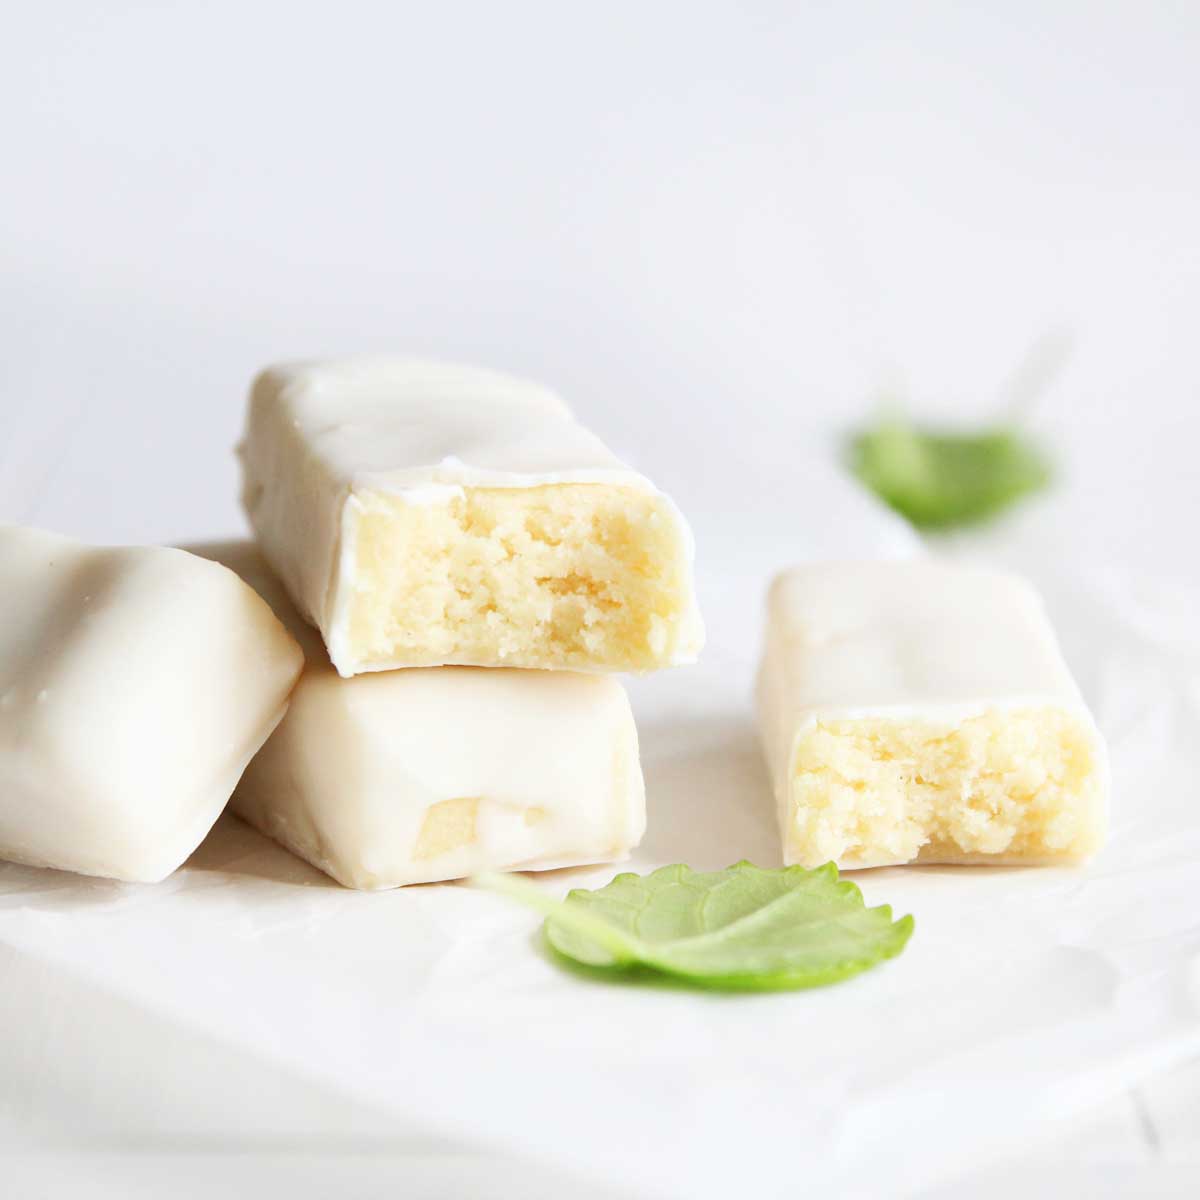 Healthy Homemade Lemon Protein Bars made with Collagen Peptides - Sweet Corn Flatbread